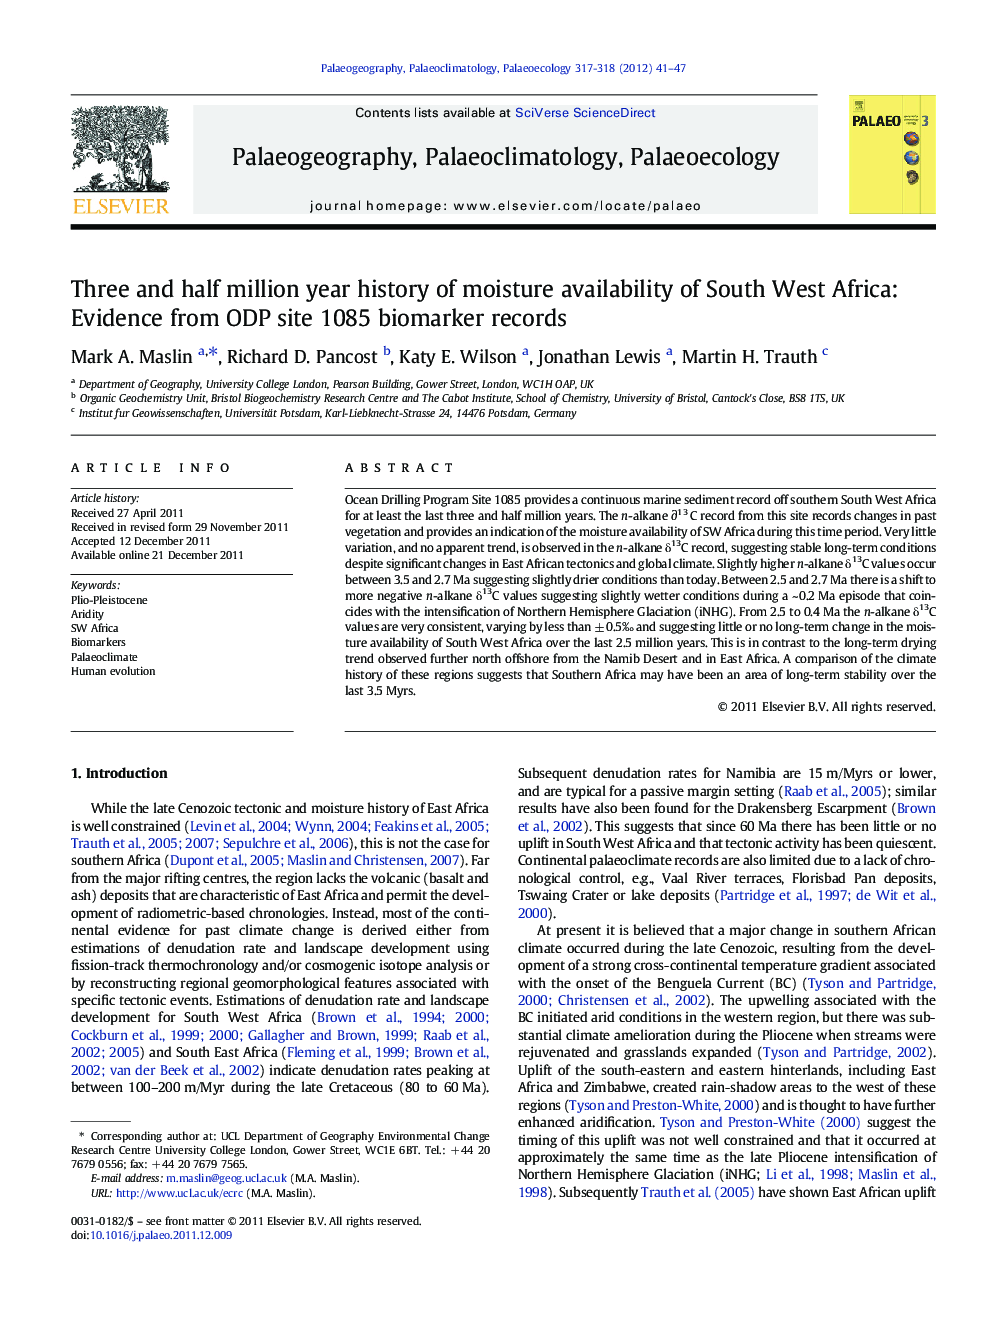 Three and half million year history of moisture availability of South West Africa: Evidence from ODP site 1085 biomarker records